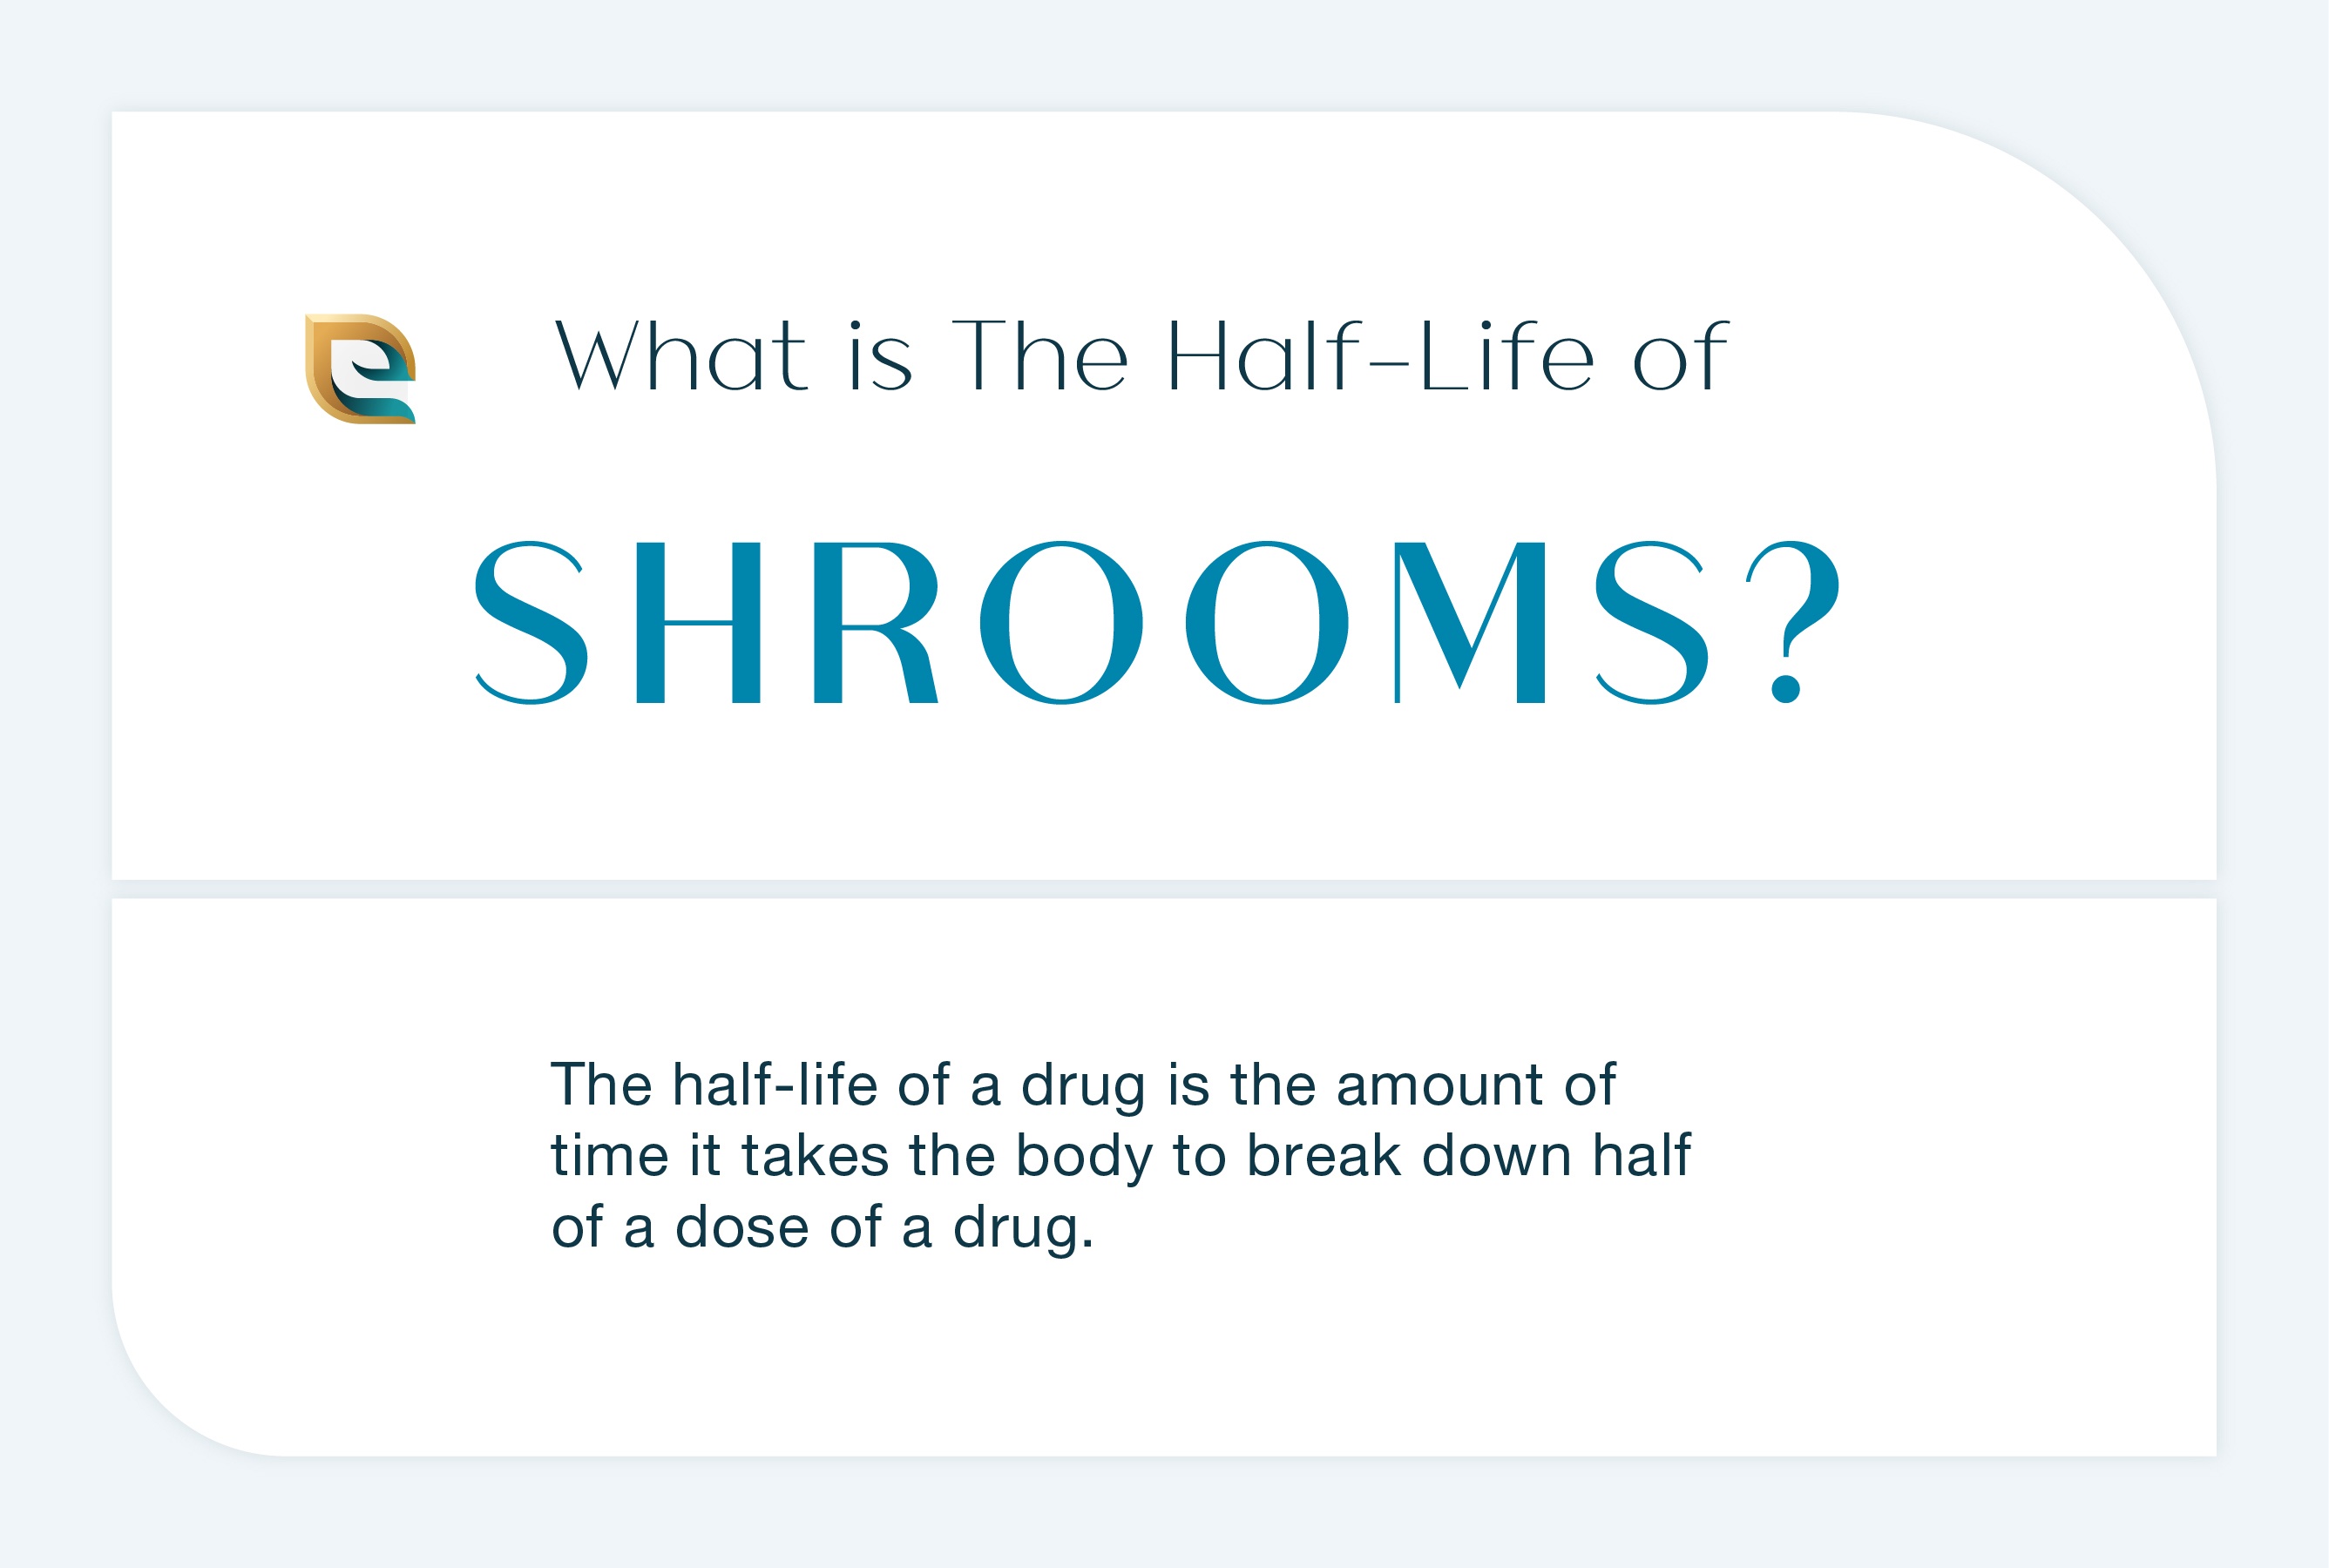 What is half life of Shrooms? This image describes the half life of Mushrooms